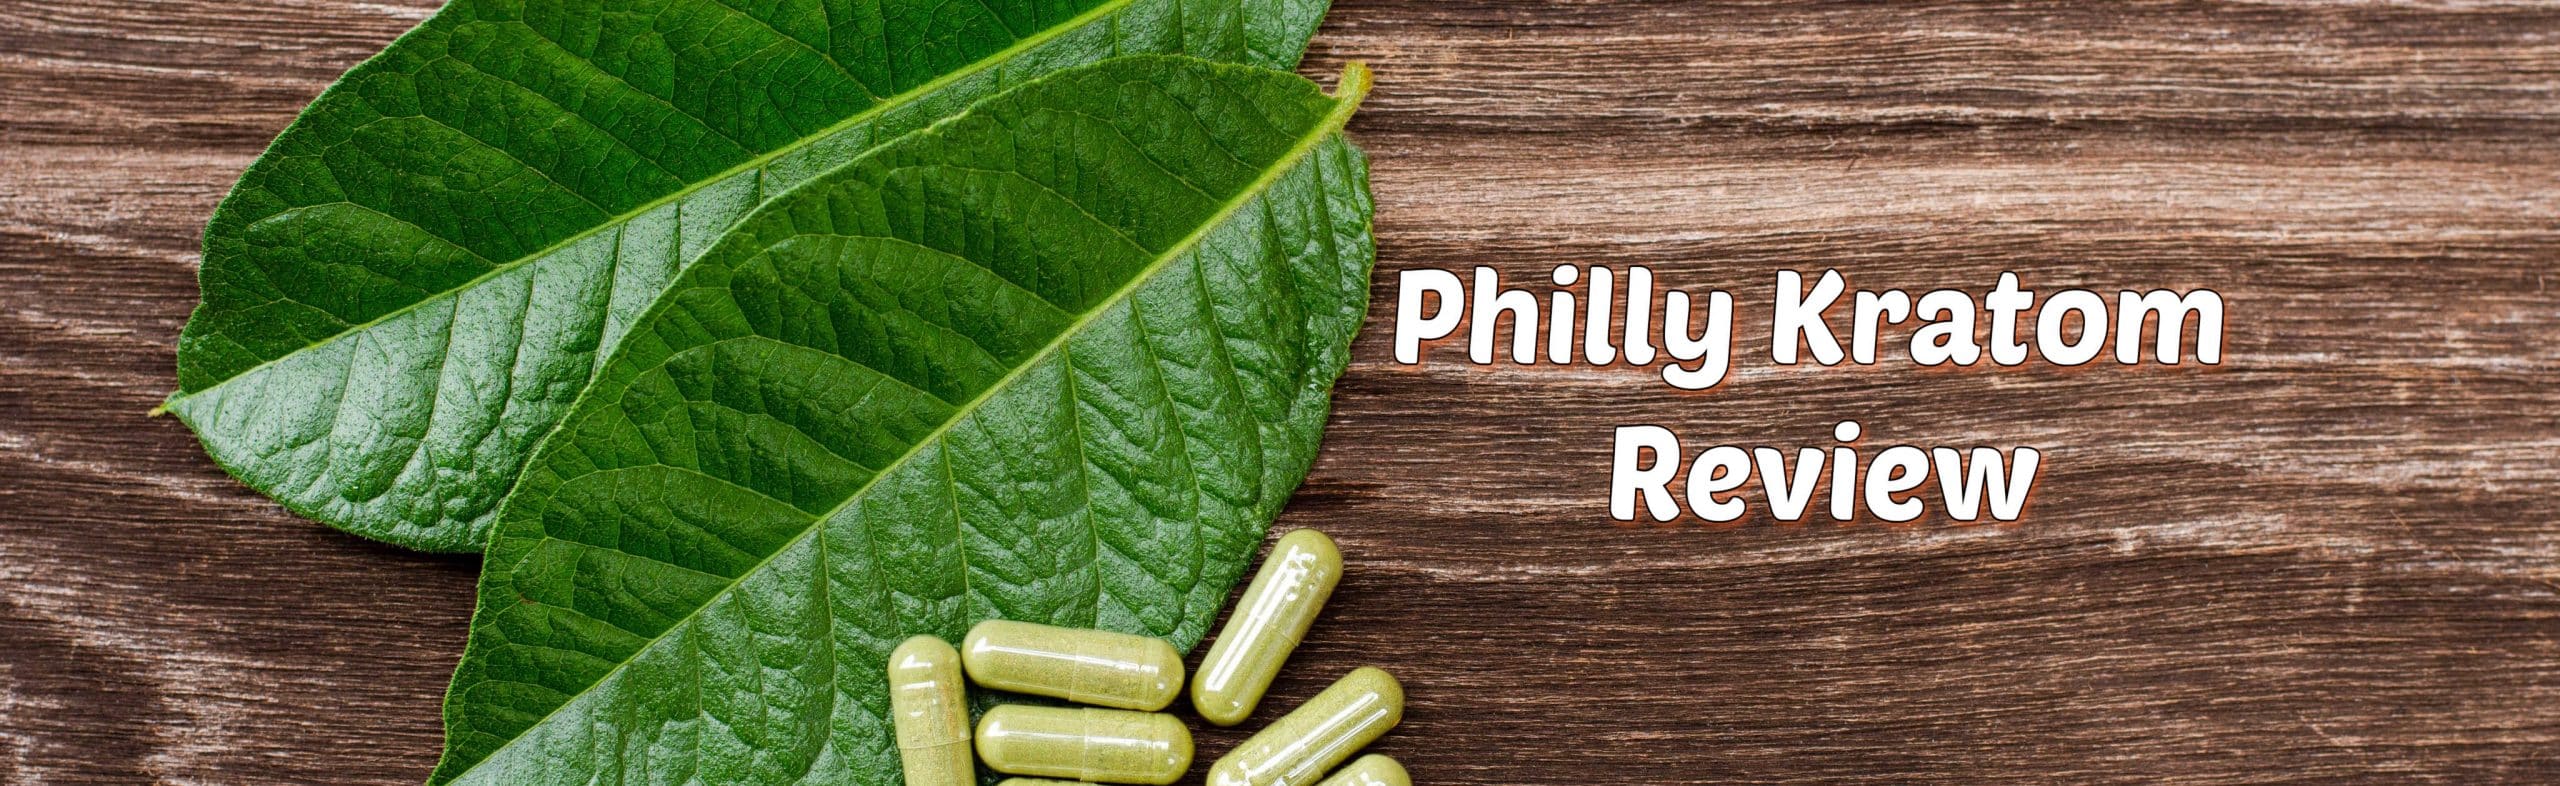 image of philly kratom review